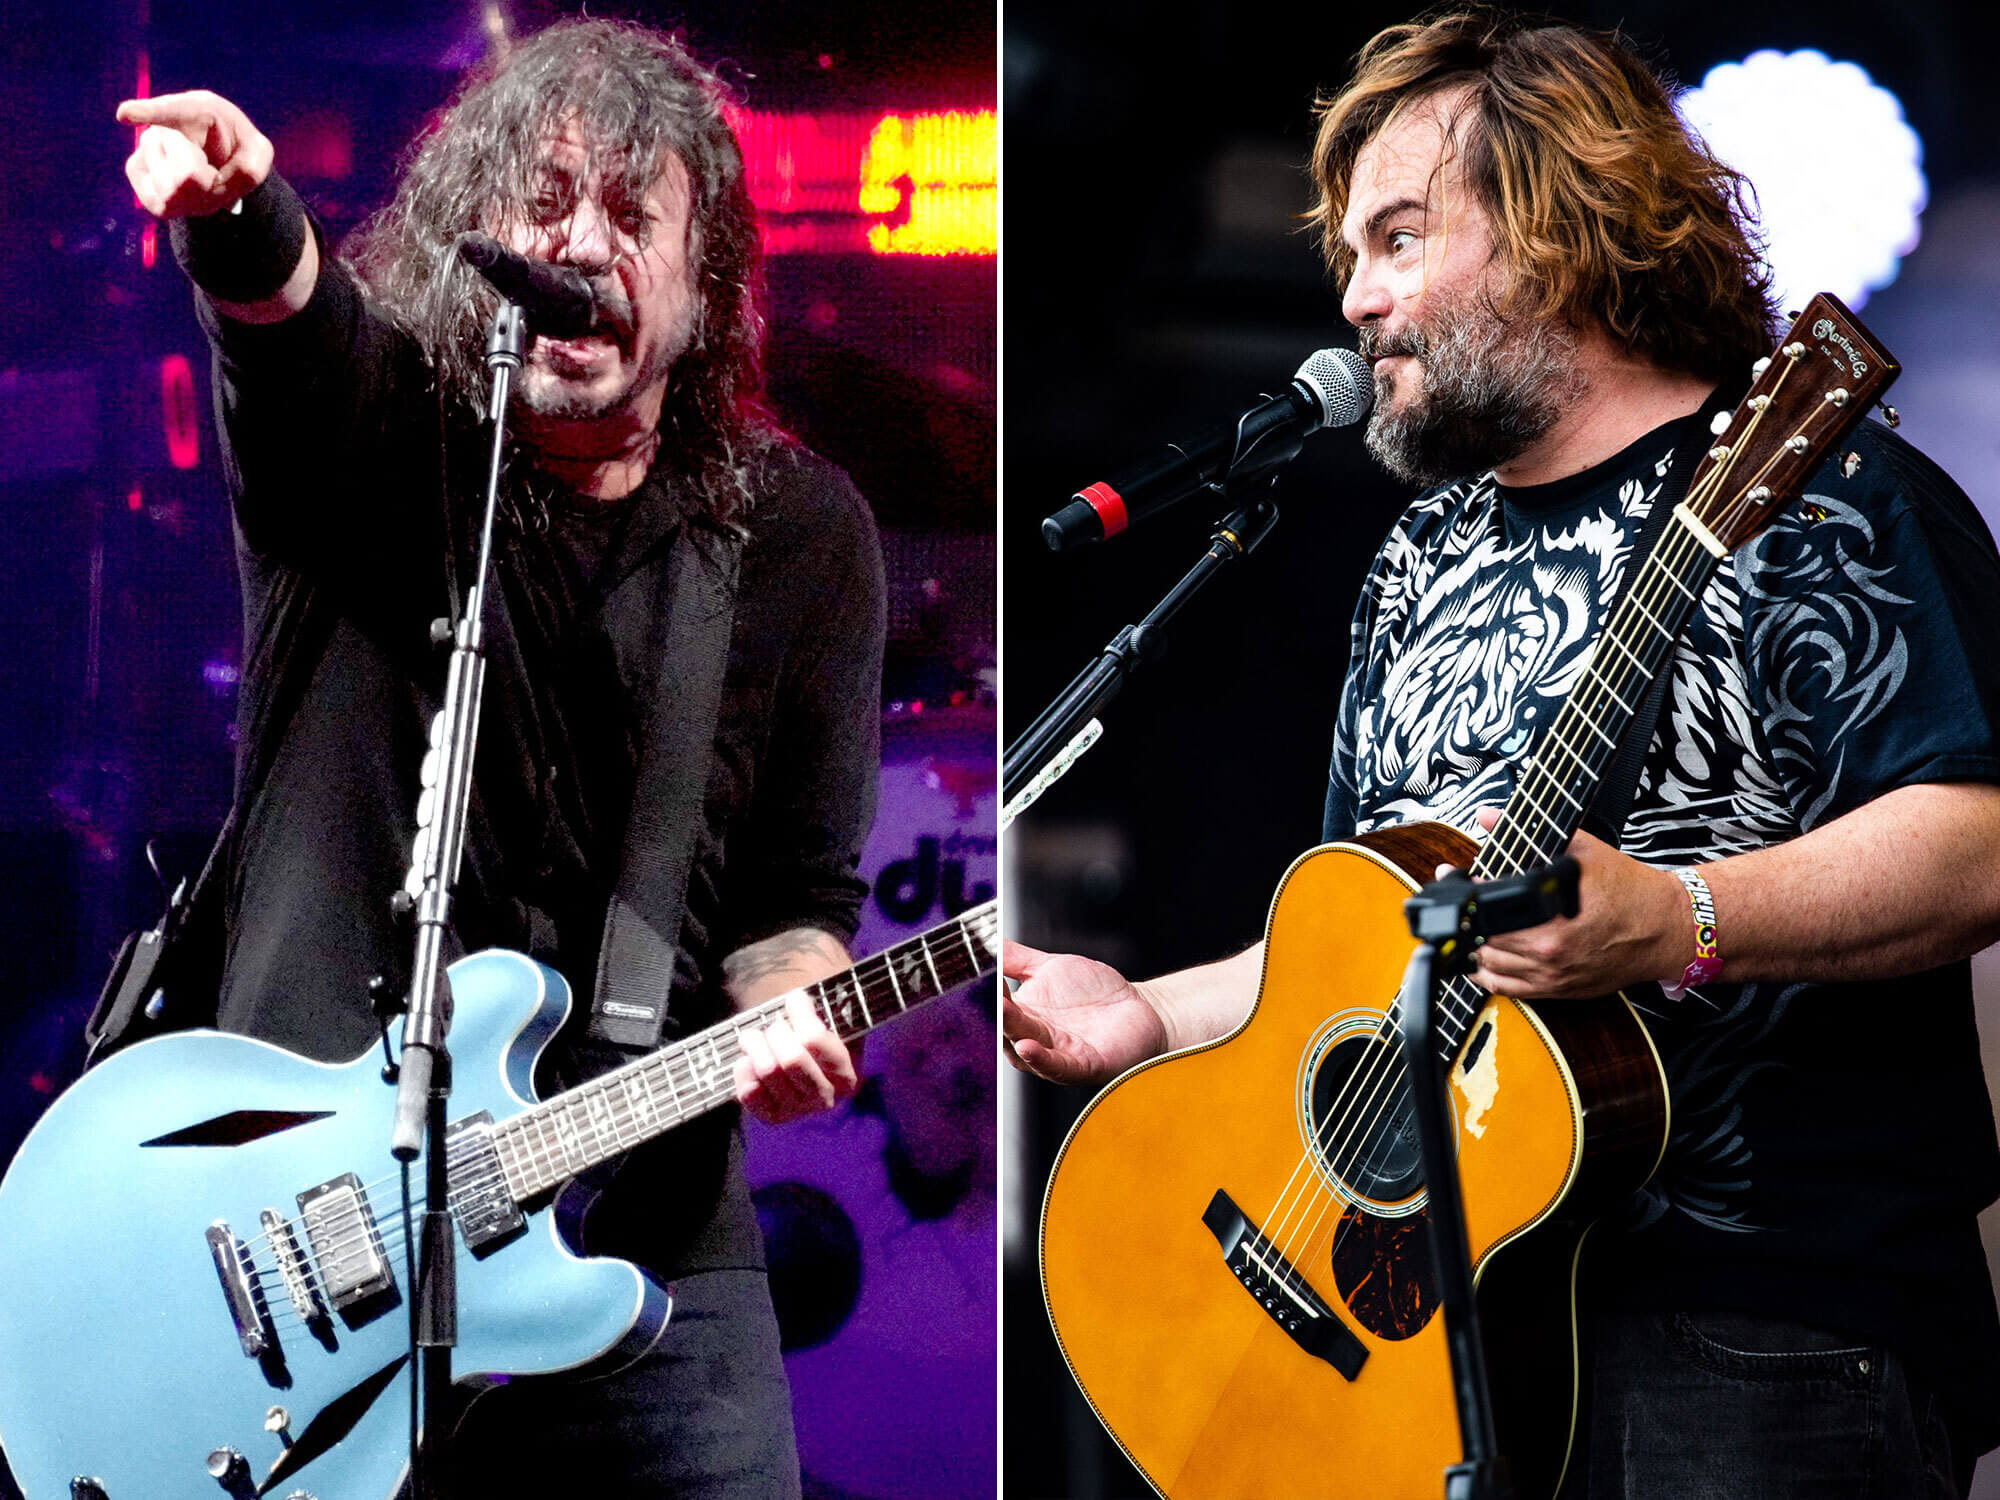 Dave-Grohl-Jack-Black@2000x1500